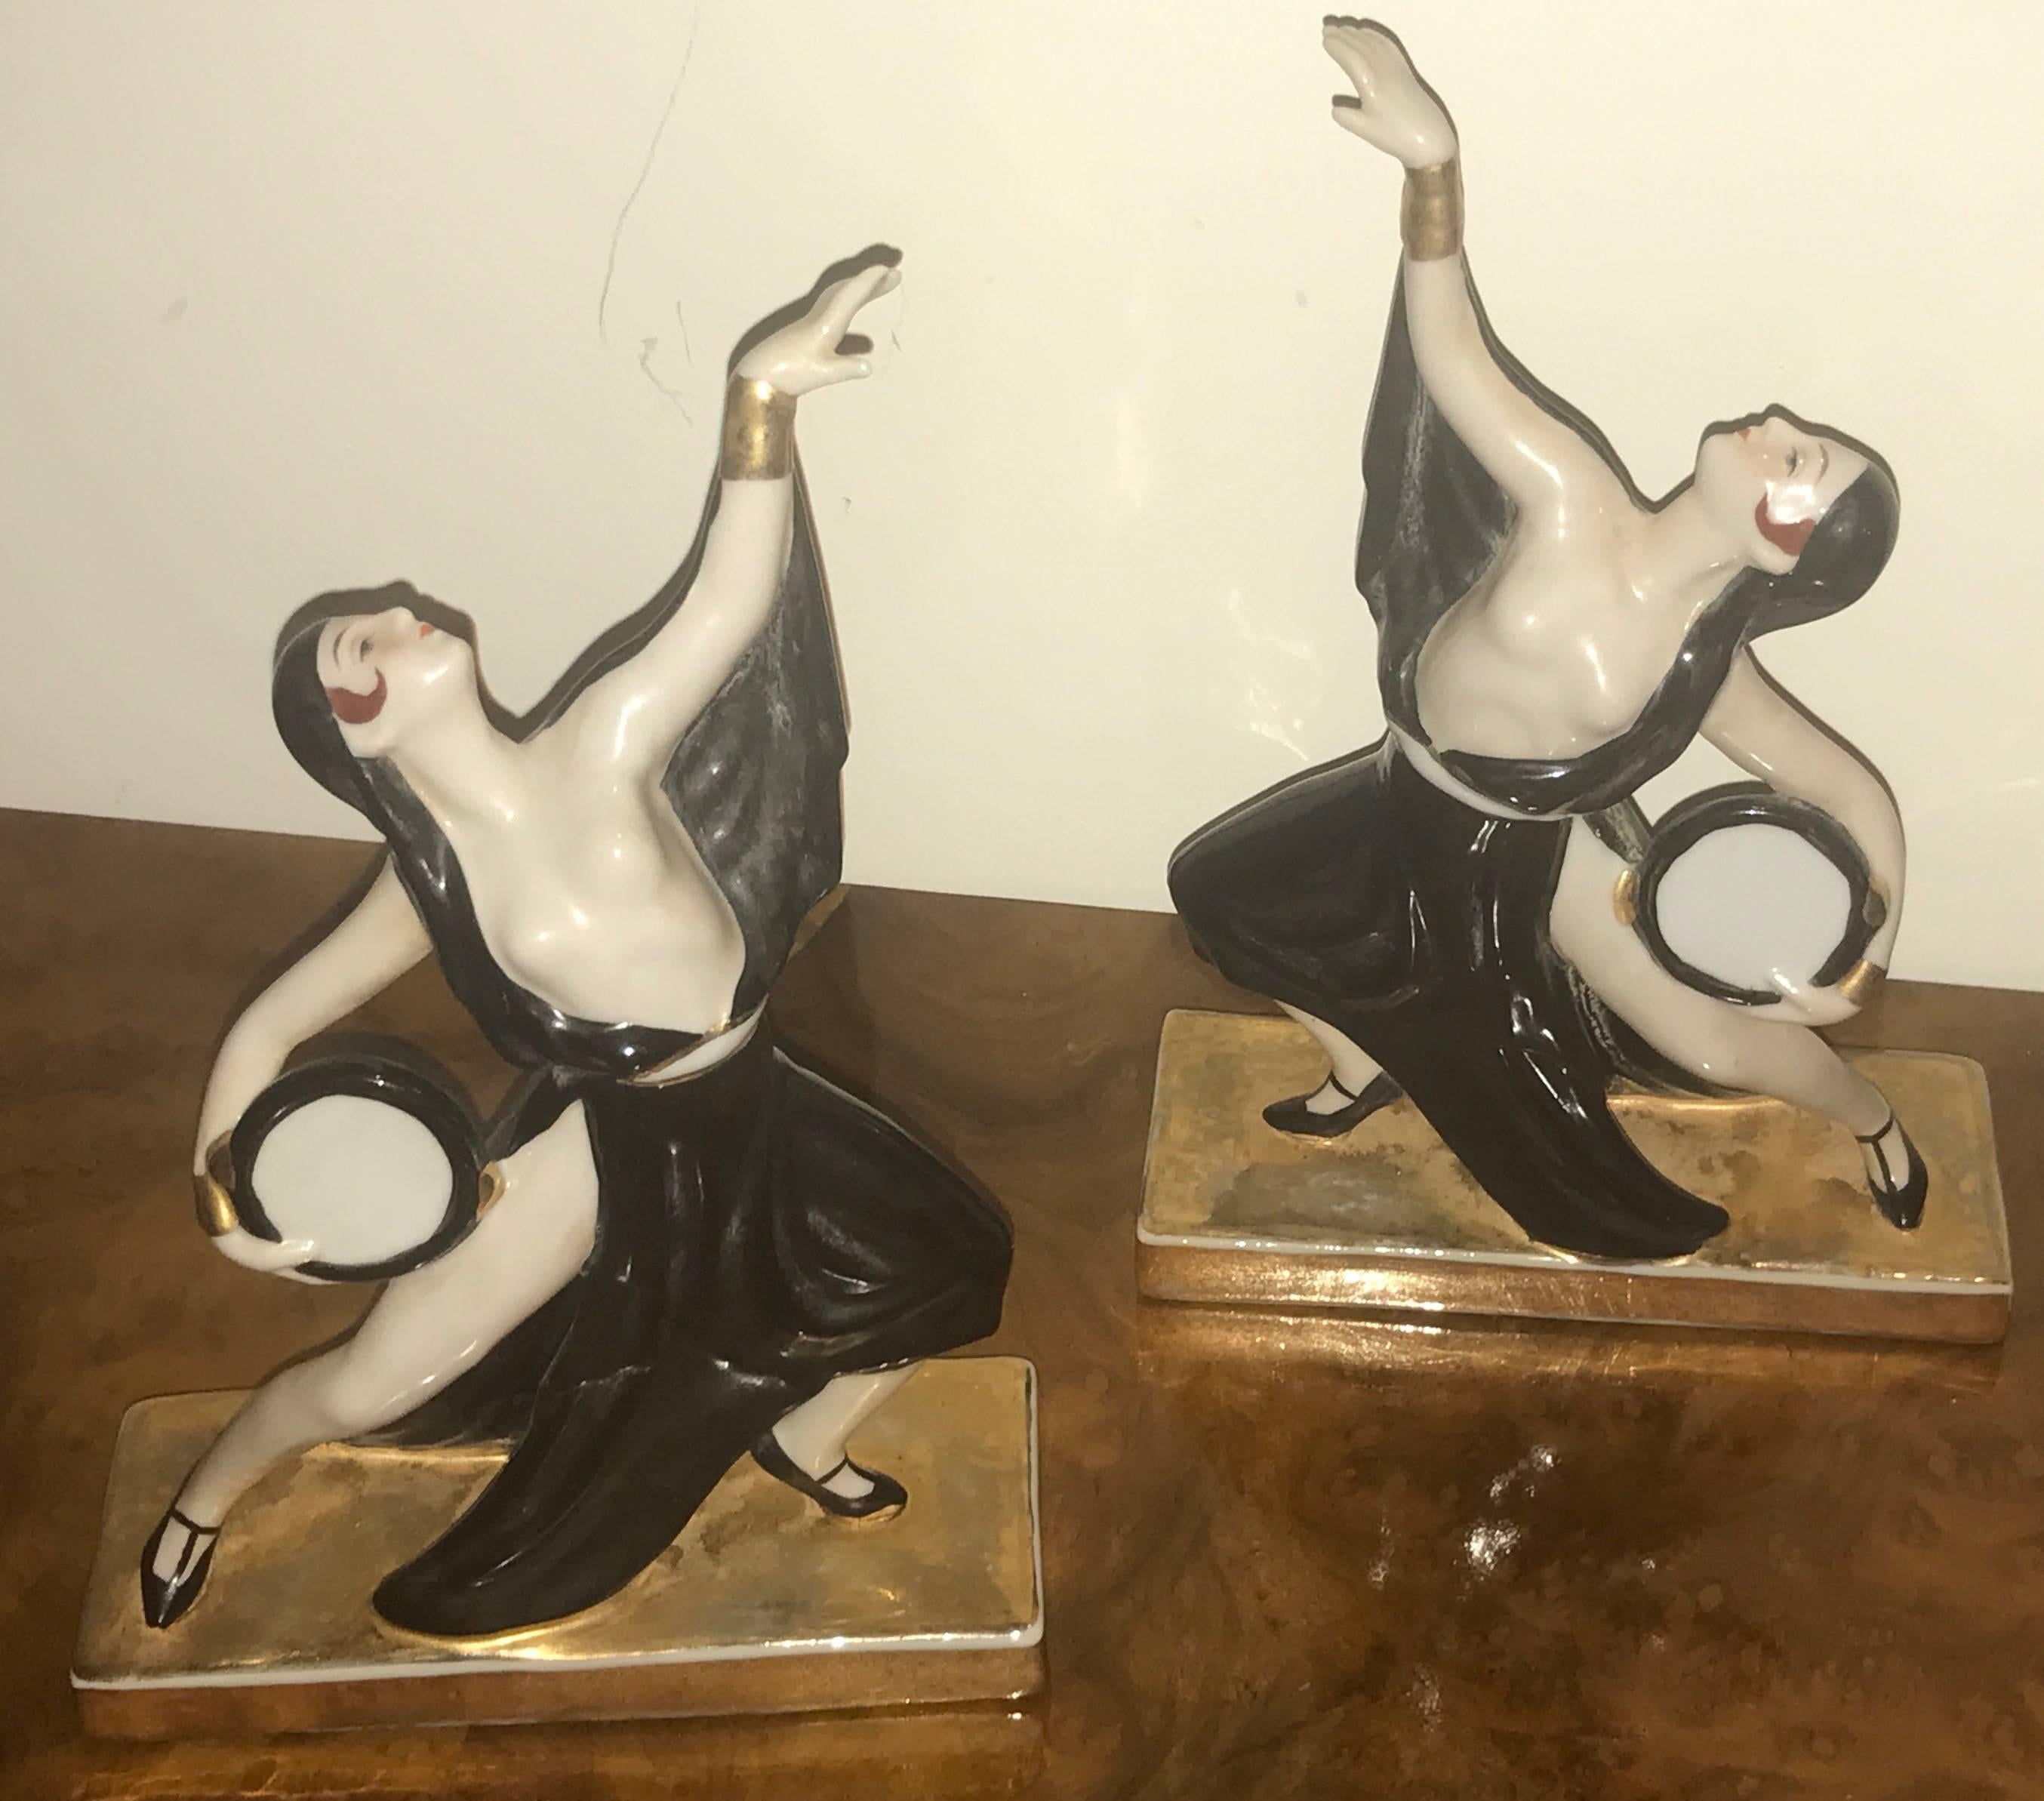 Bonbonniere candy jars. ROBJ was a master of decorative art in the early 20th century, and much of the wares that bore the ROBJ name were commissioned from Limoges. These are a pair of Art Deco porcelain “Tambourine Dancers” in black, cream, henna